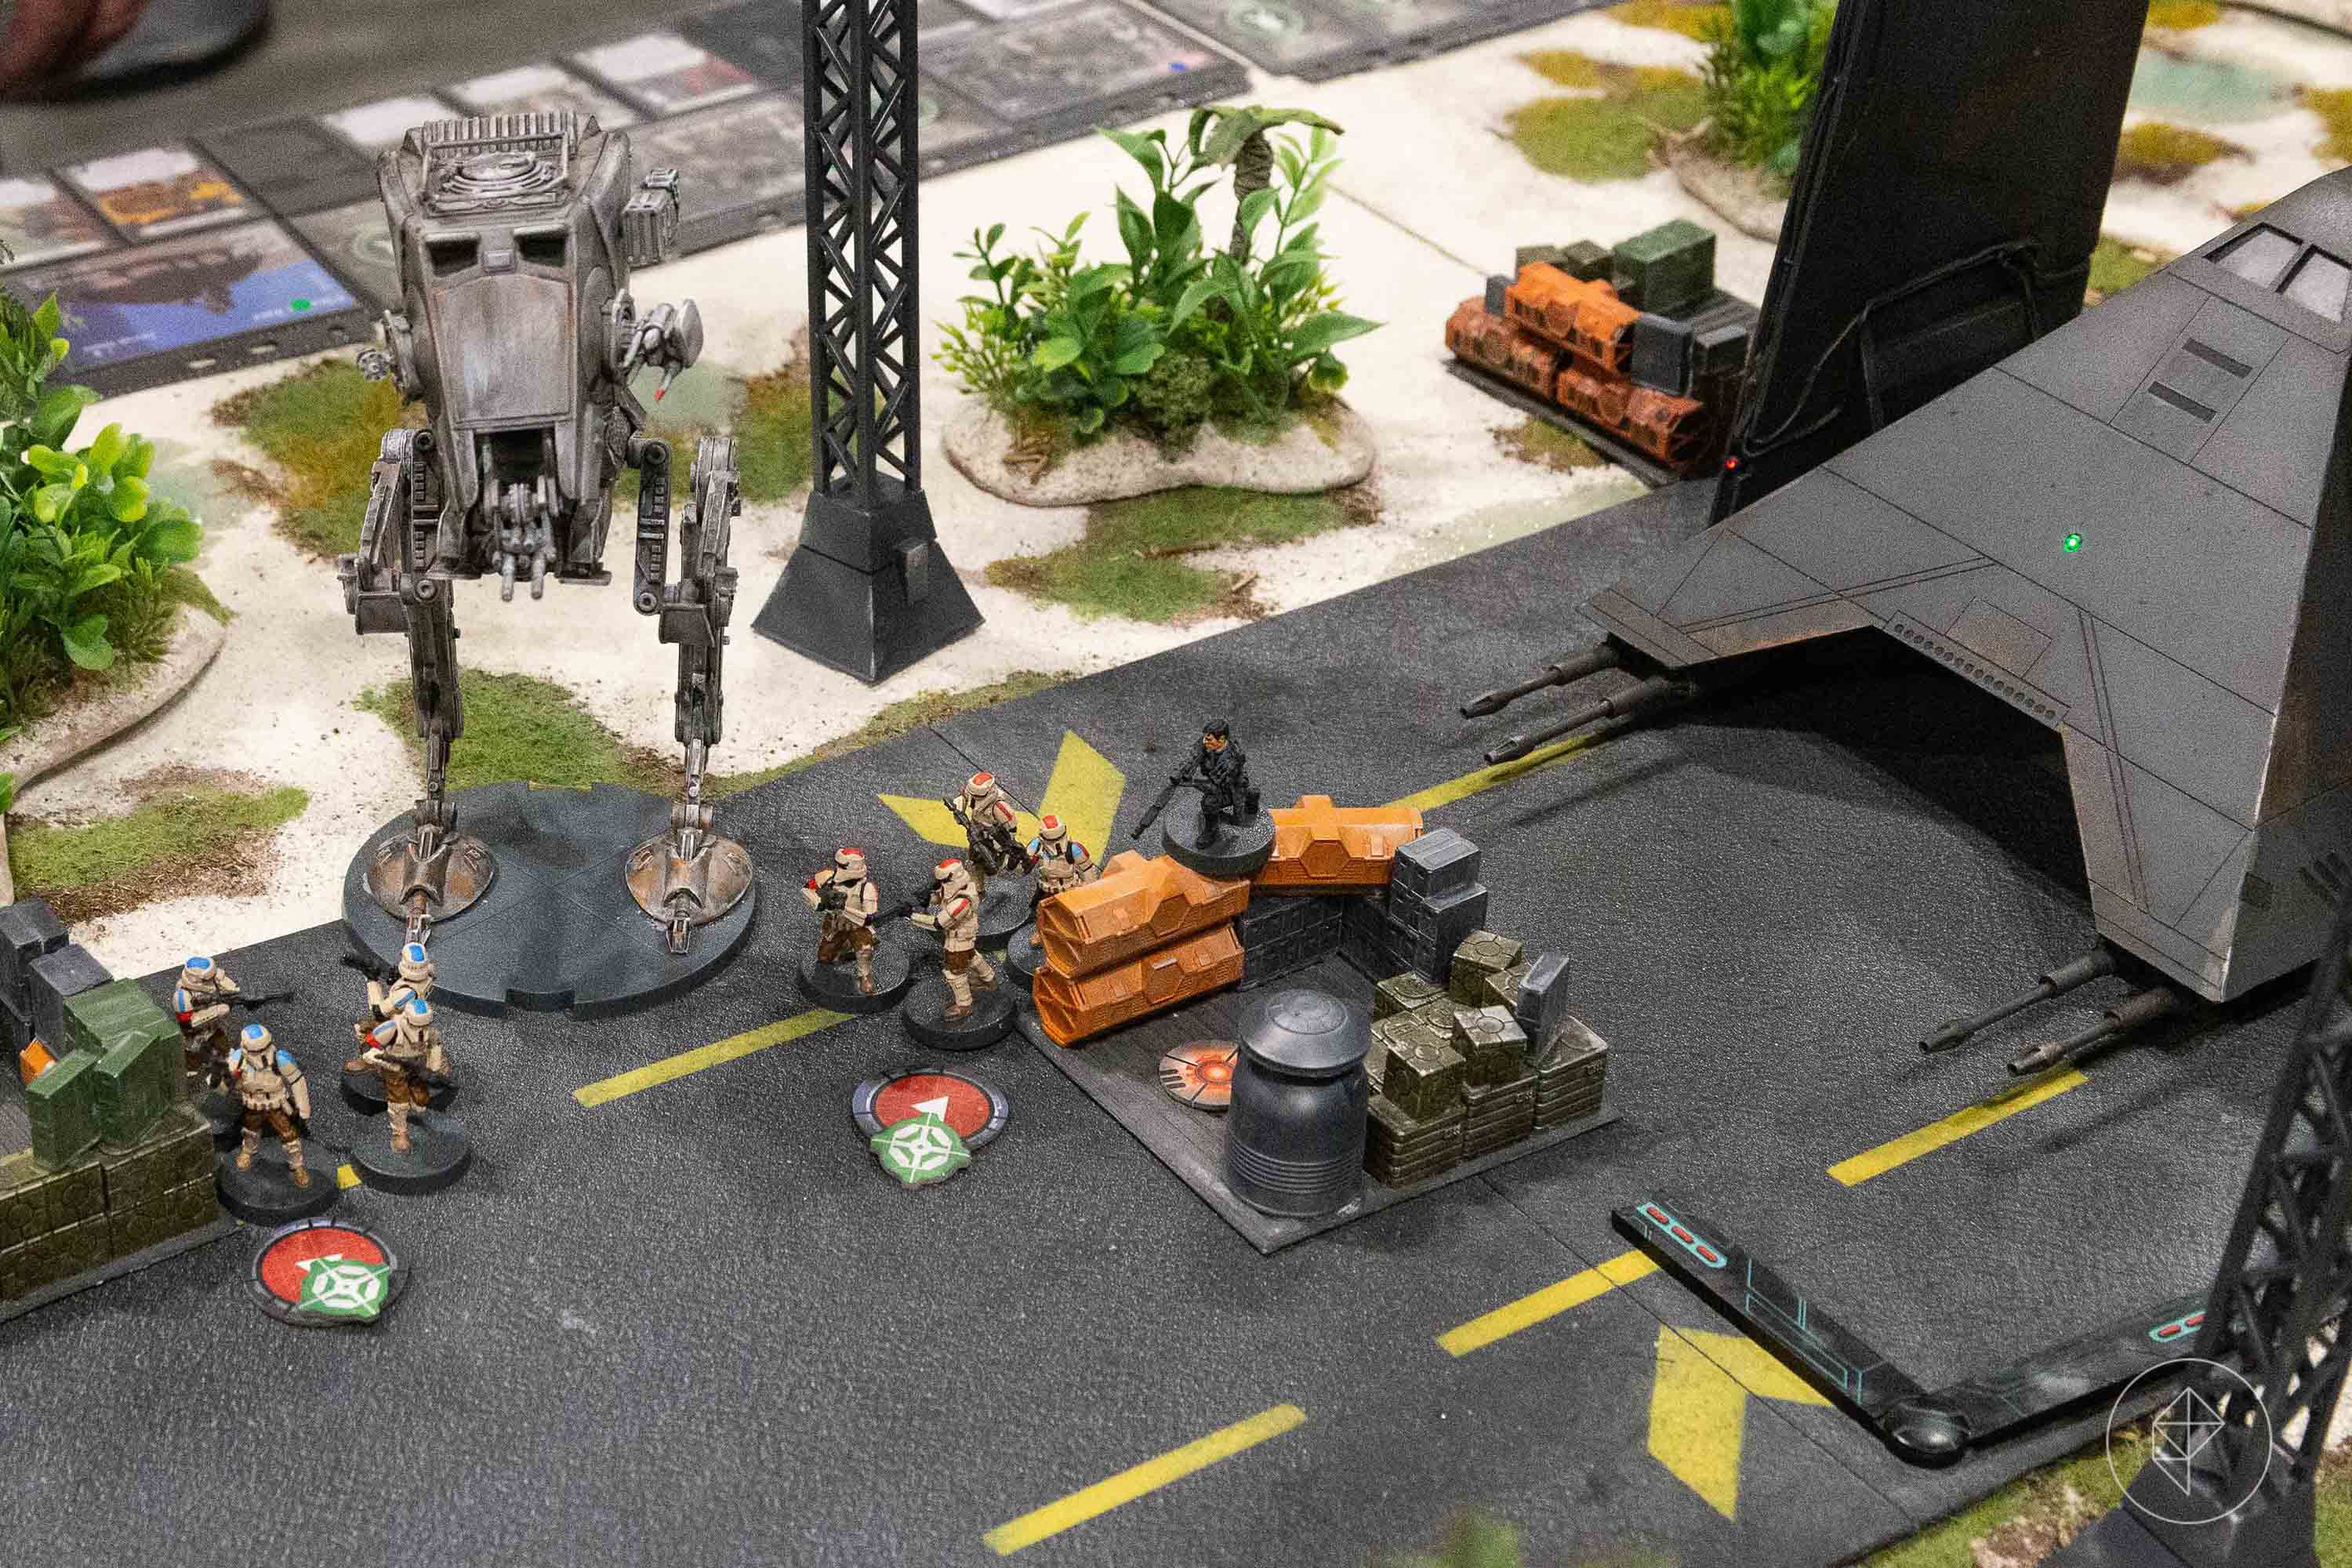 The <a class="ql-link" href="https://www.polygon.com/2017/8/22/16183878/star-wars-legion-preview-price-release-date-gen-con" target="_blank">Star Wars: Legion</a> community was out in force, playing across dozens of elaborate tables like this one. The landing lights on Kylo Ren’s shuttle here actually work.